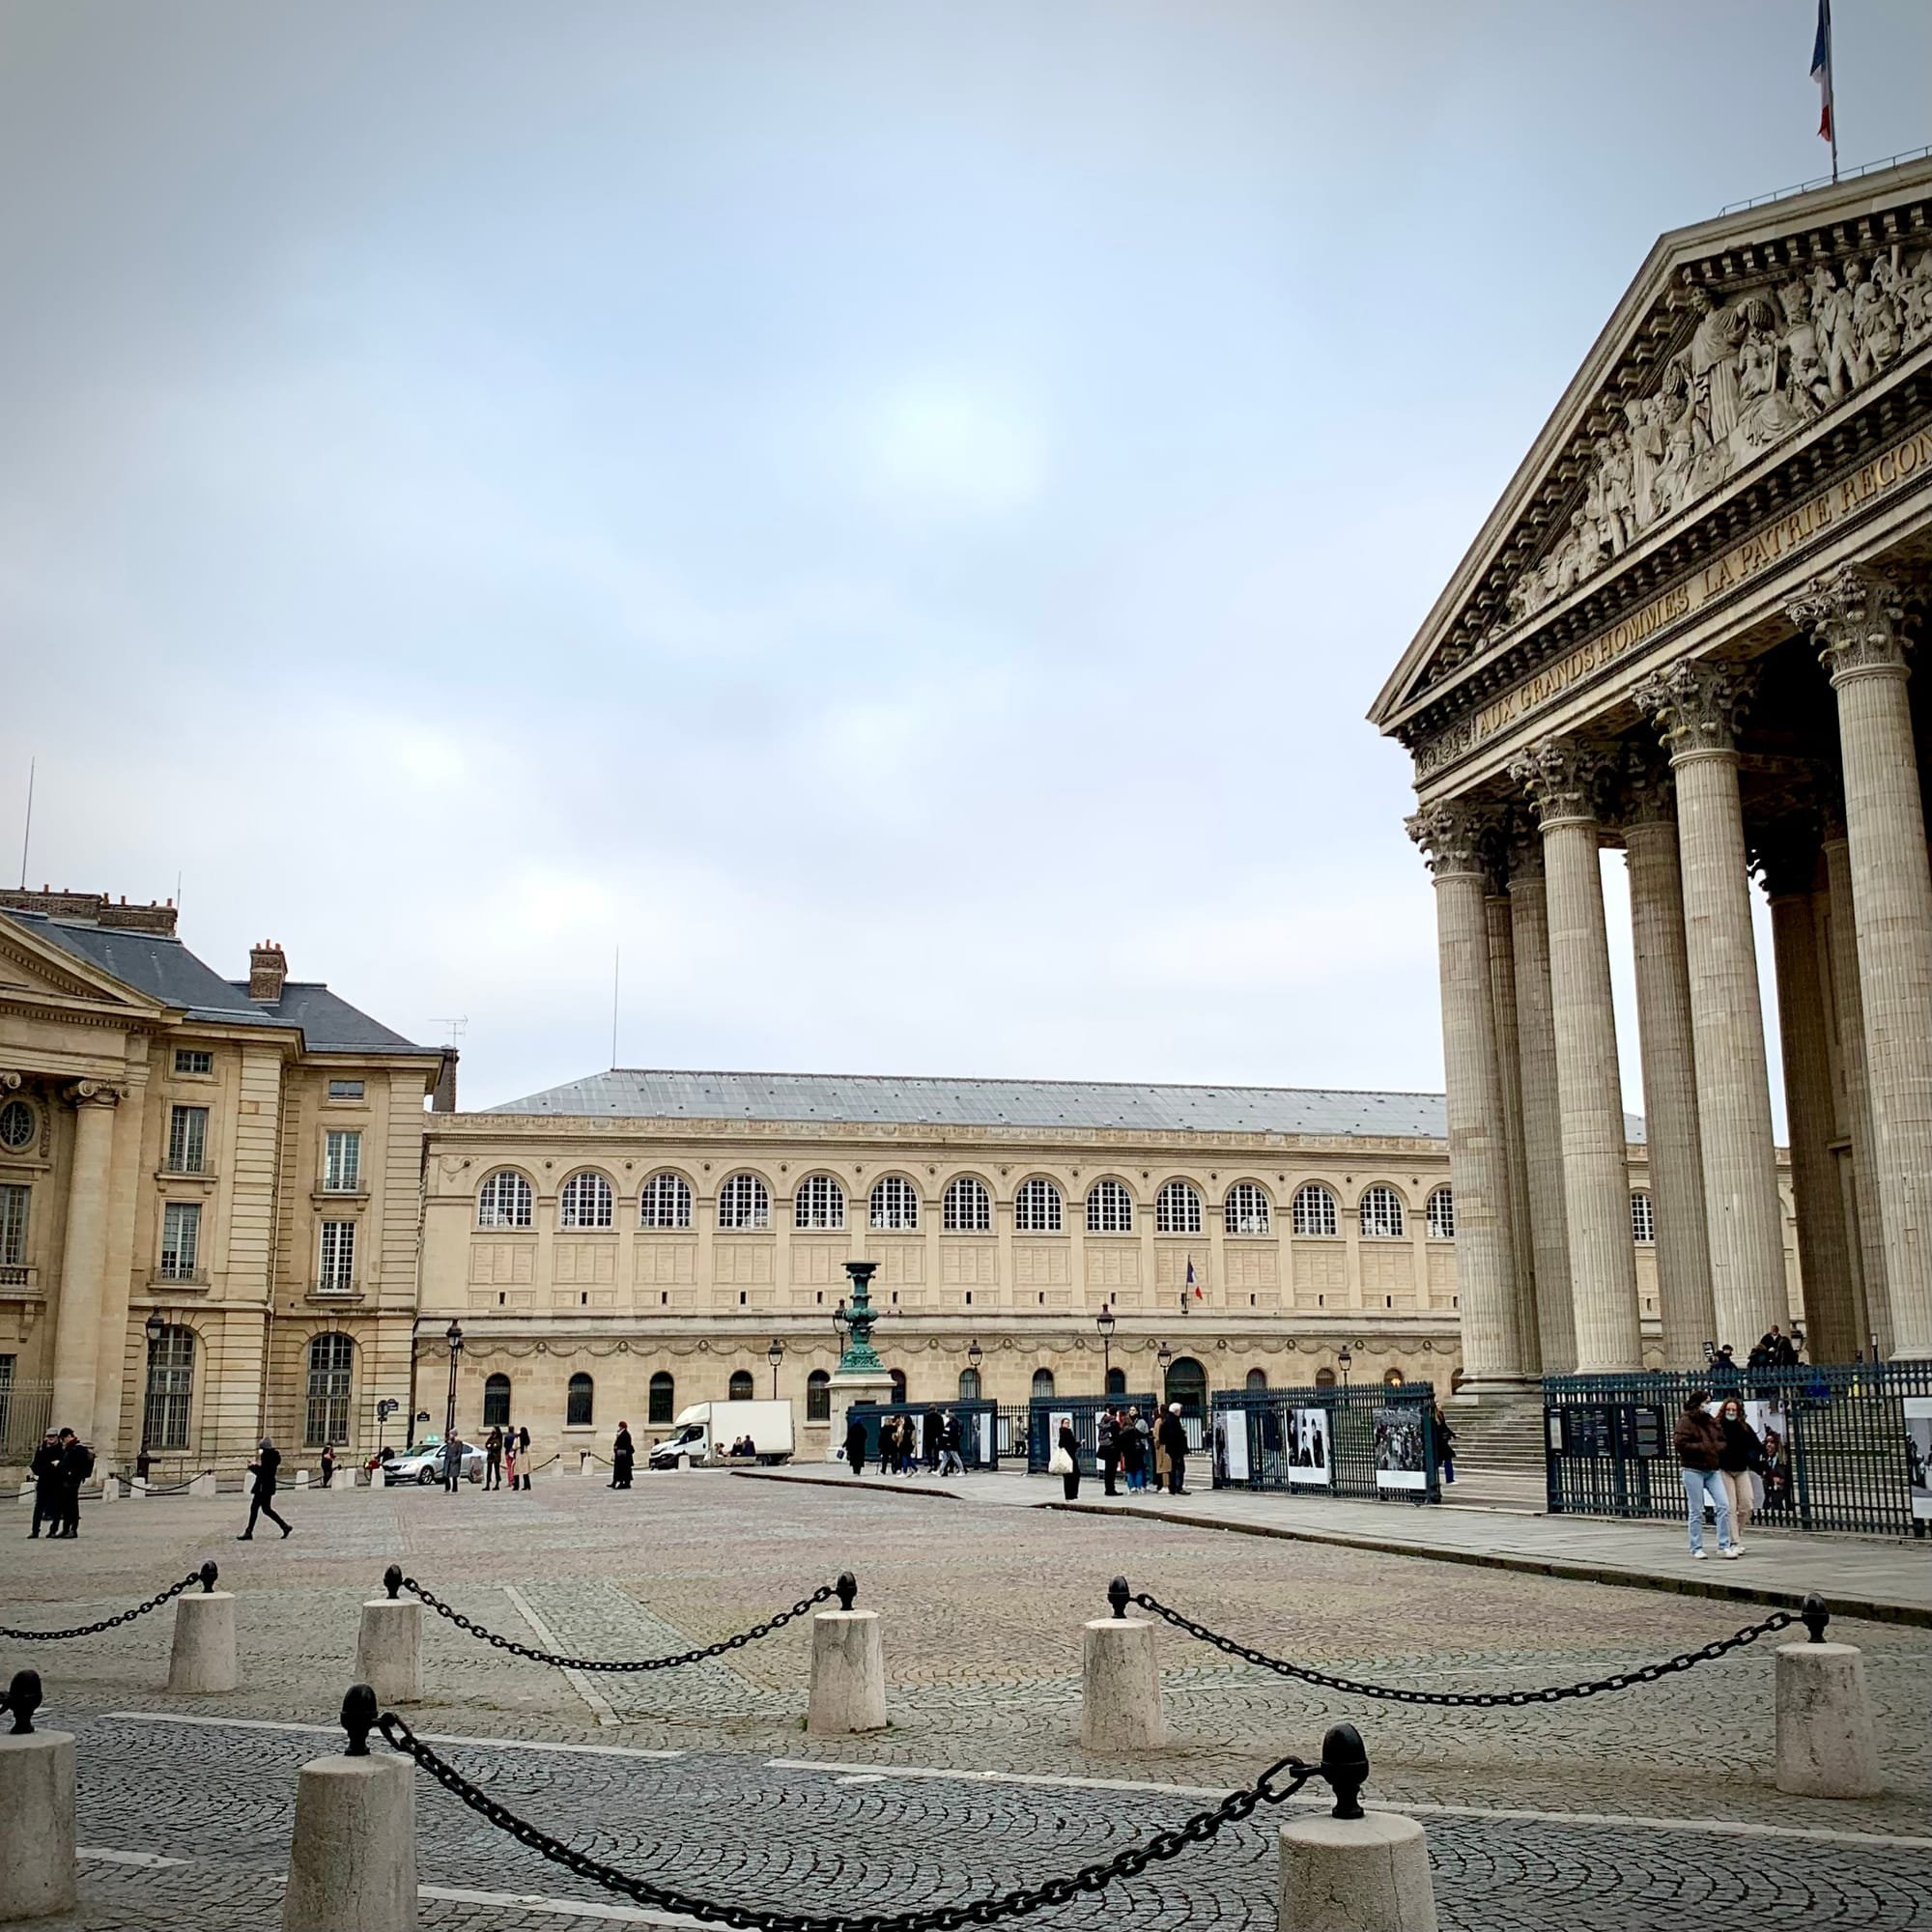 Place du Panthéon. On the right is the Pantheon, on the left the Faculty of Law. In the middle, like a wall, stands the Sainte-Geneviève Library.